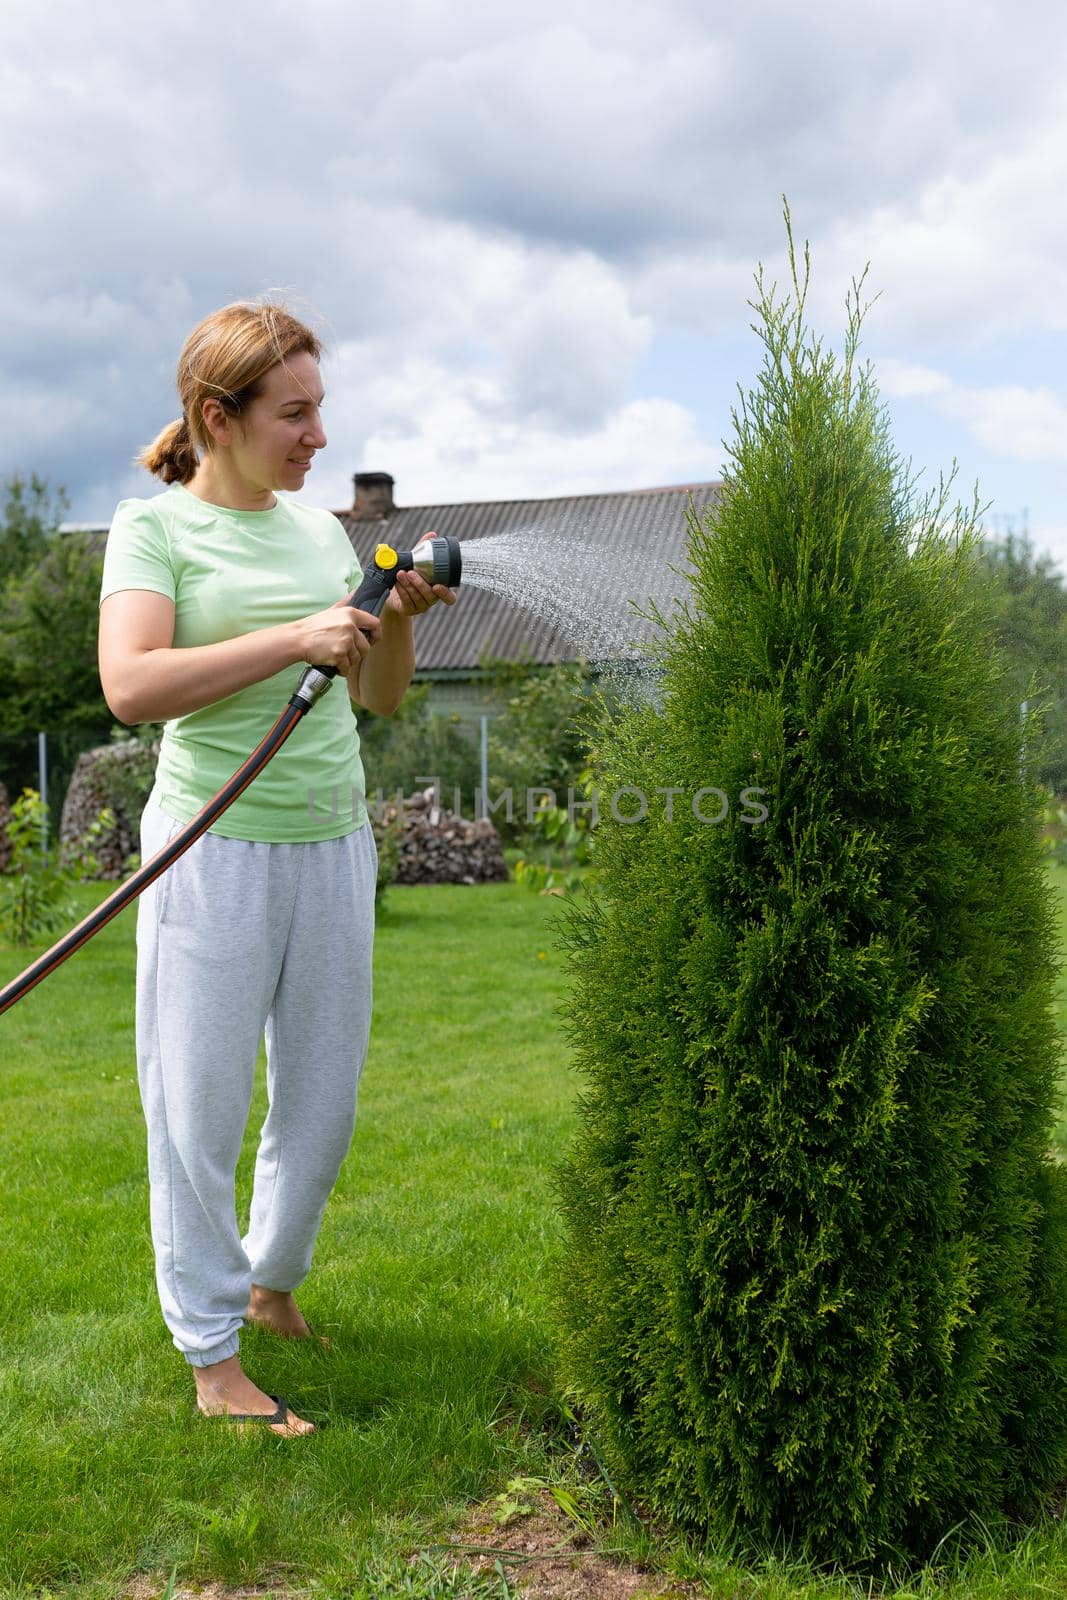 young woman caring for coniferous plants in the garden Fielding them with water from a hose by TRMK